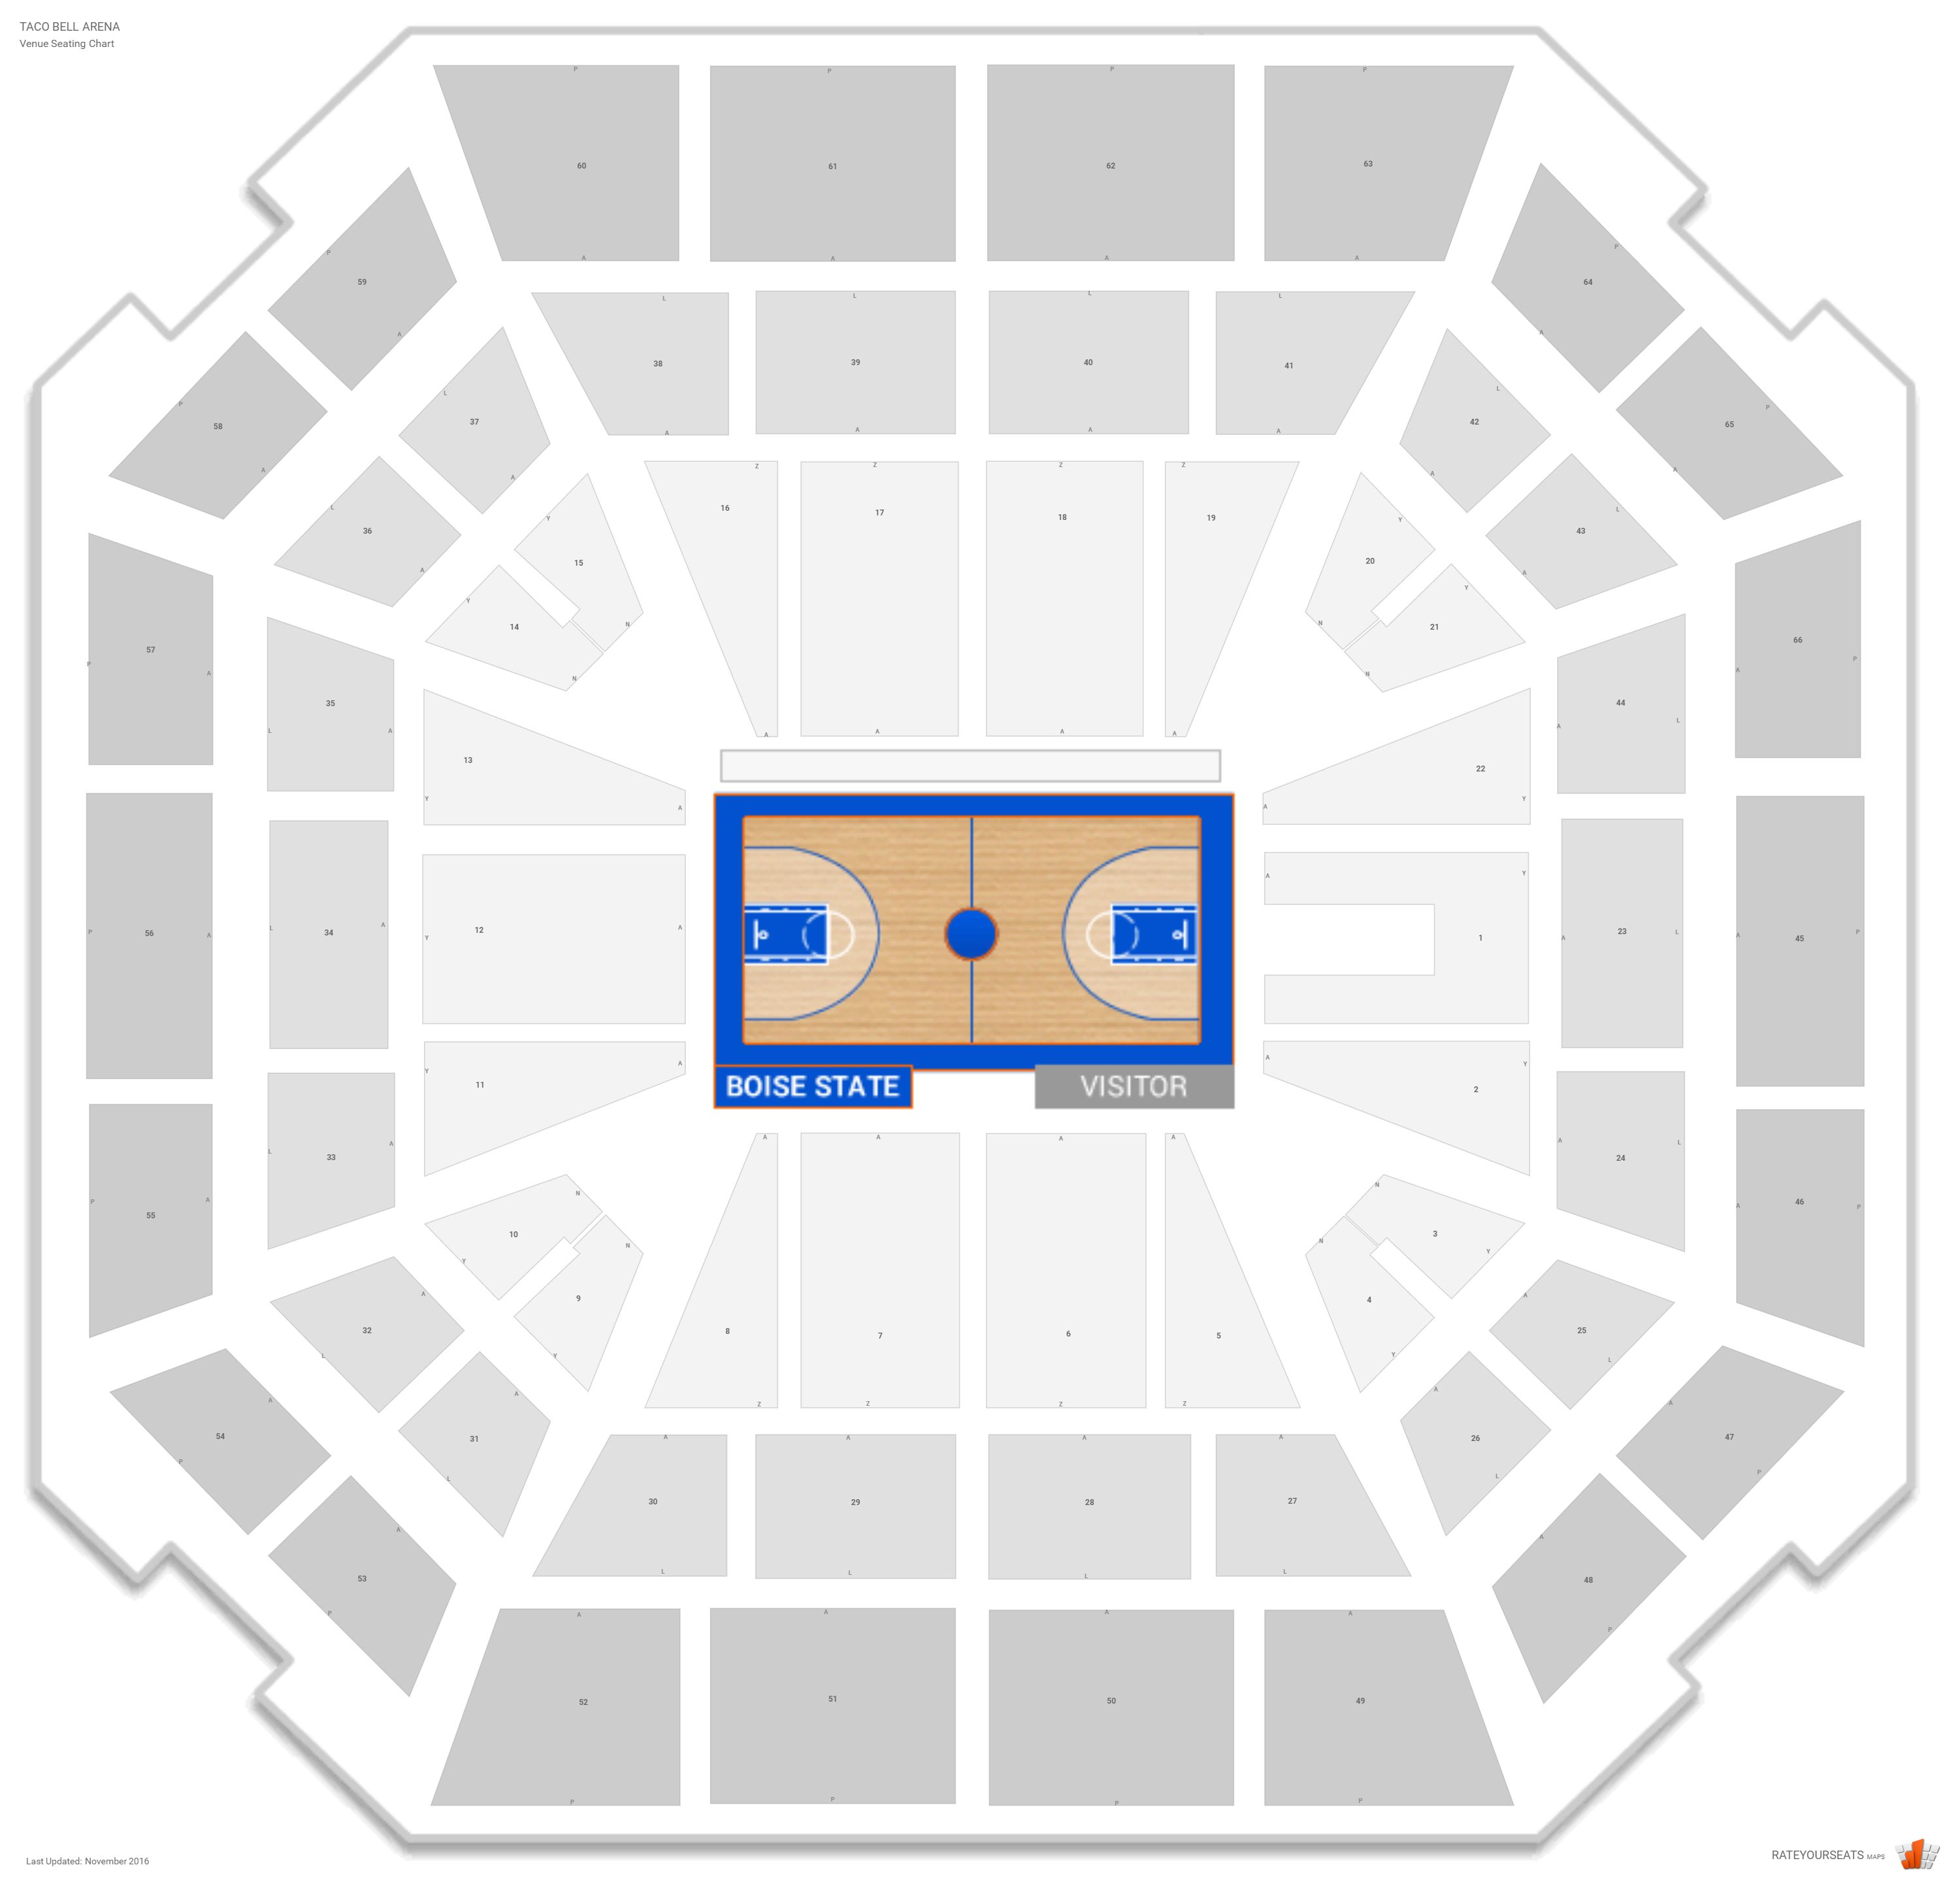 Boise State Basketball Taco Bell Arena Seating Chart Pflag